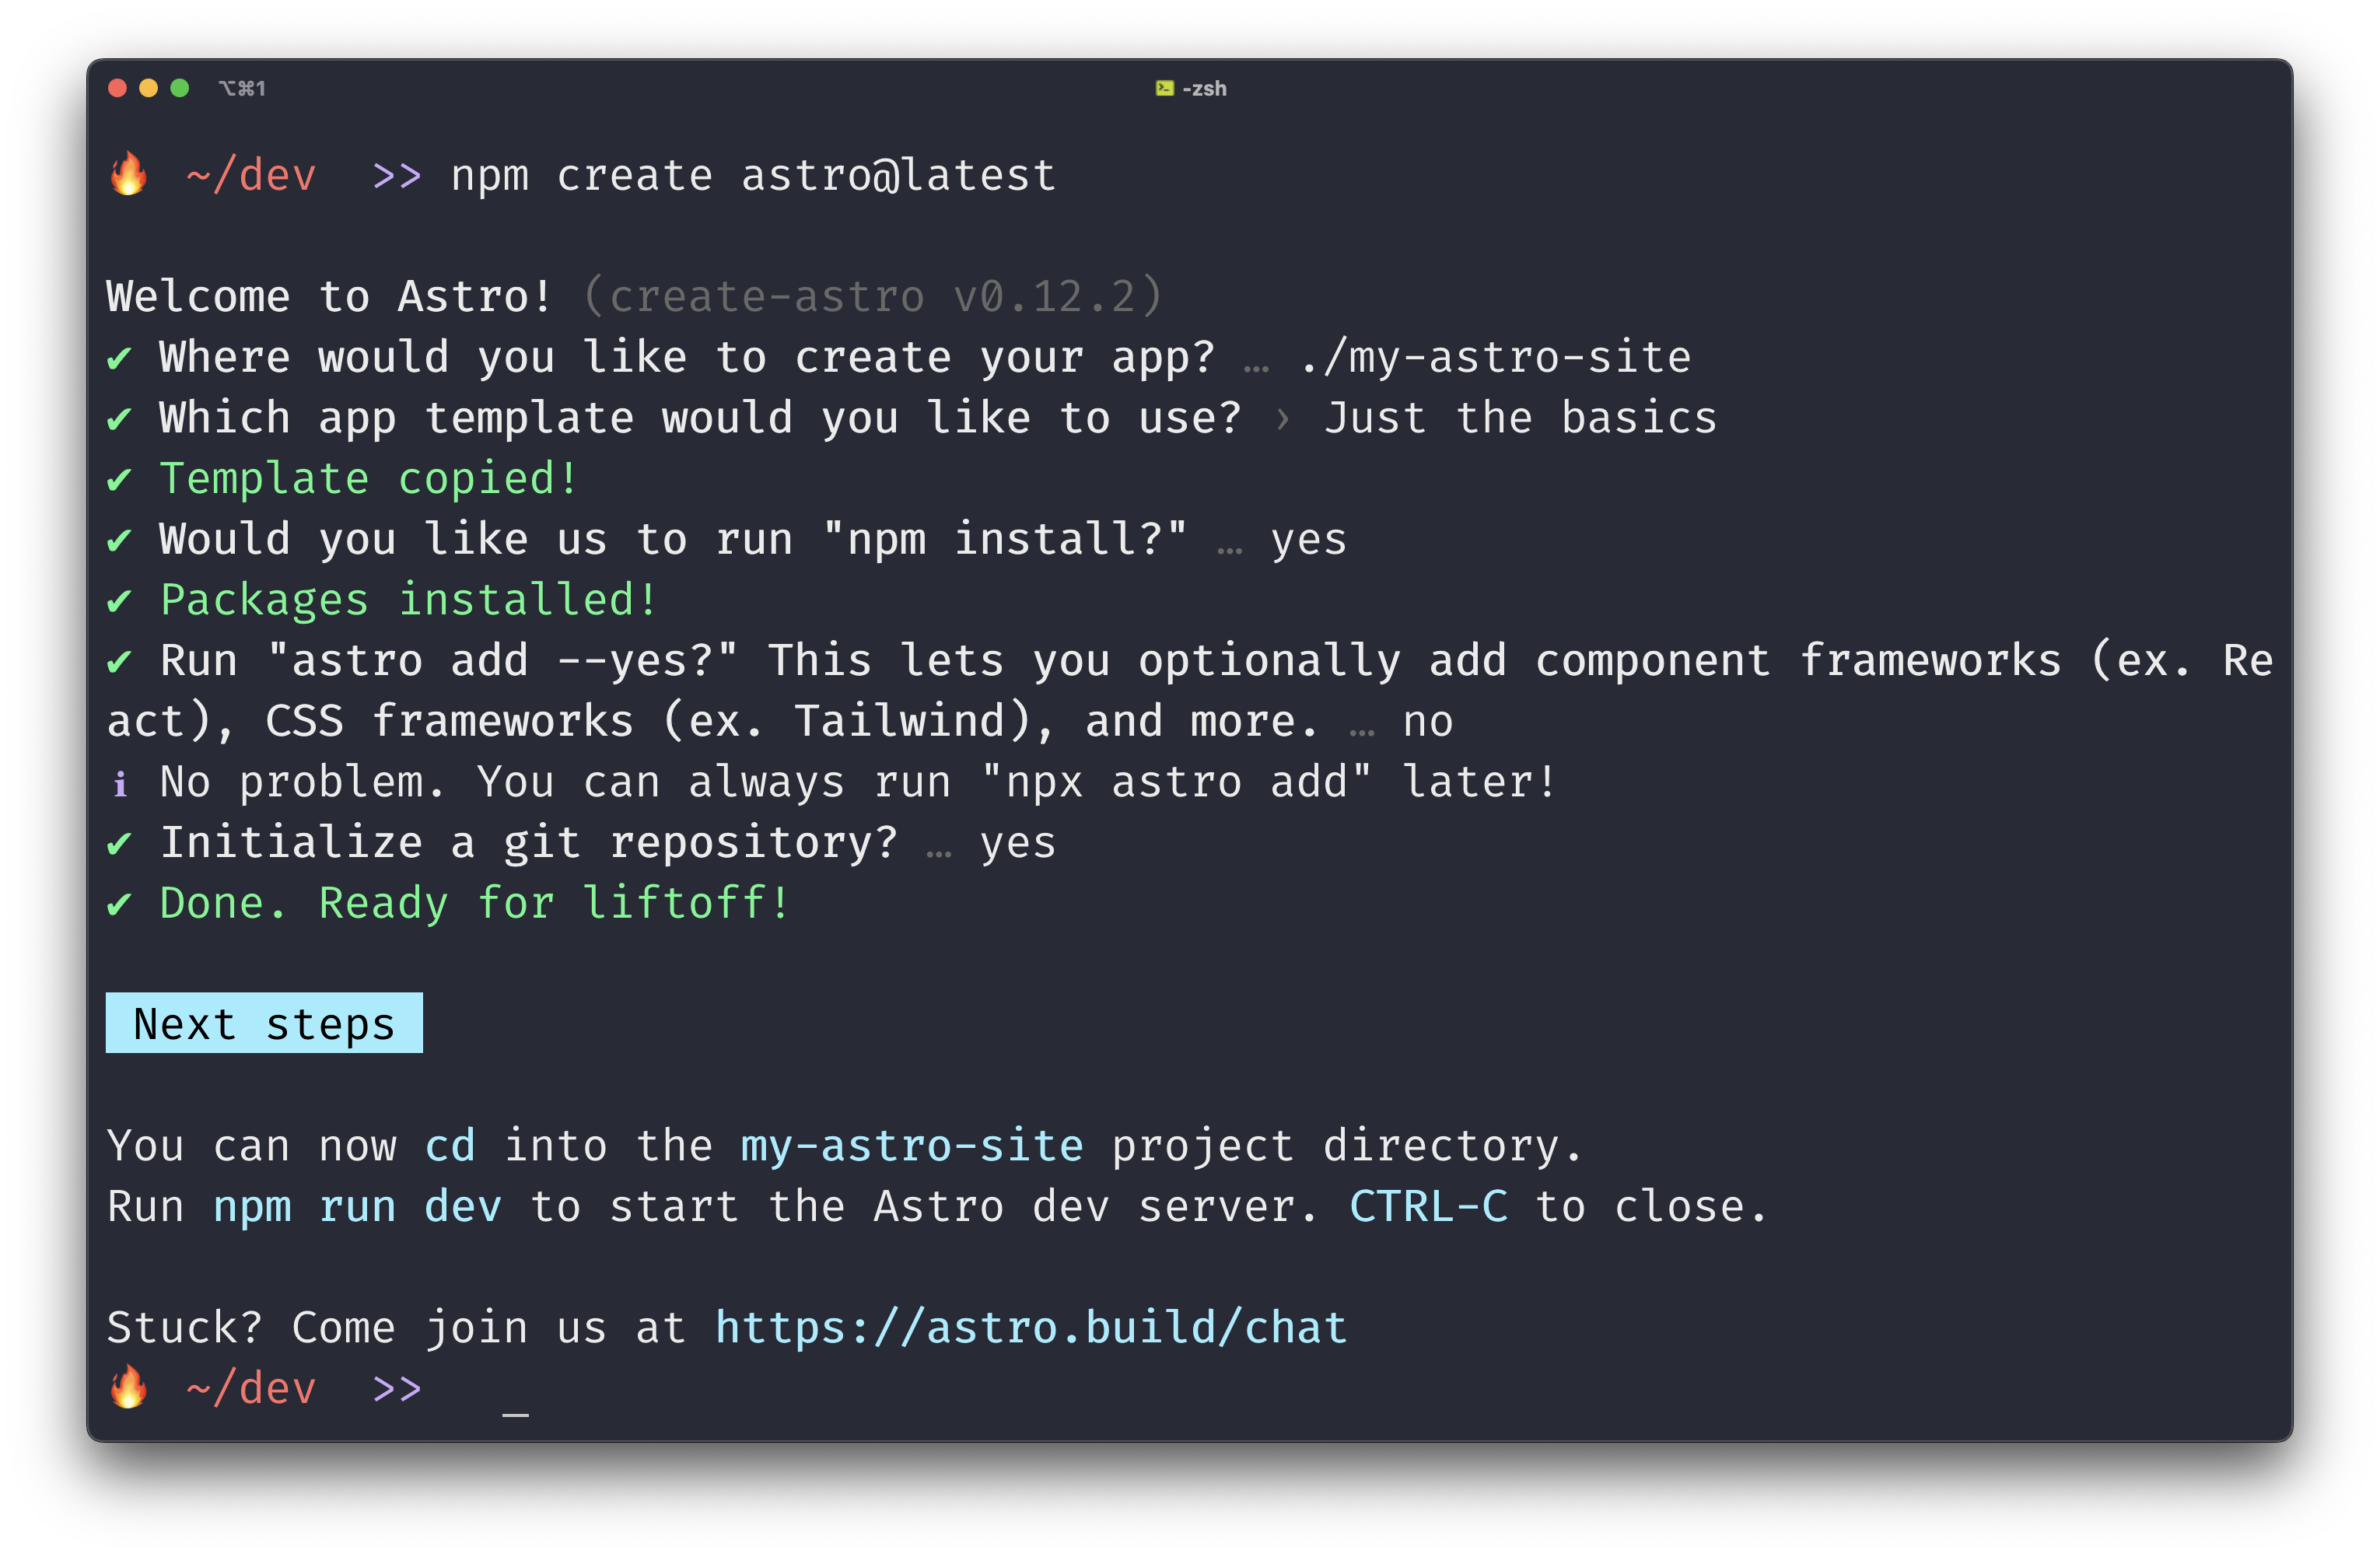 A terminal window showing a freshly created Astro project using the Astro CLI. The latest instructions are to cd into the new project directory and run npm run dev.